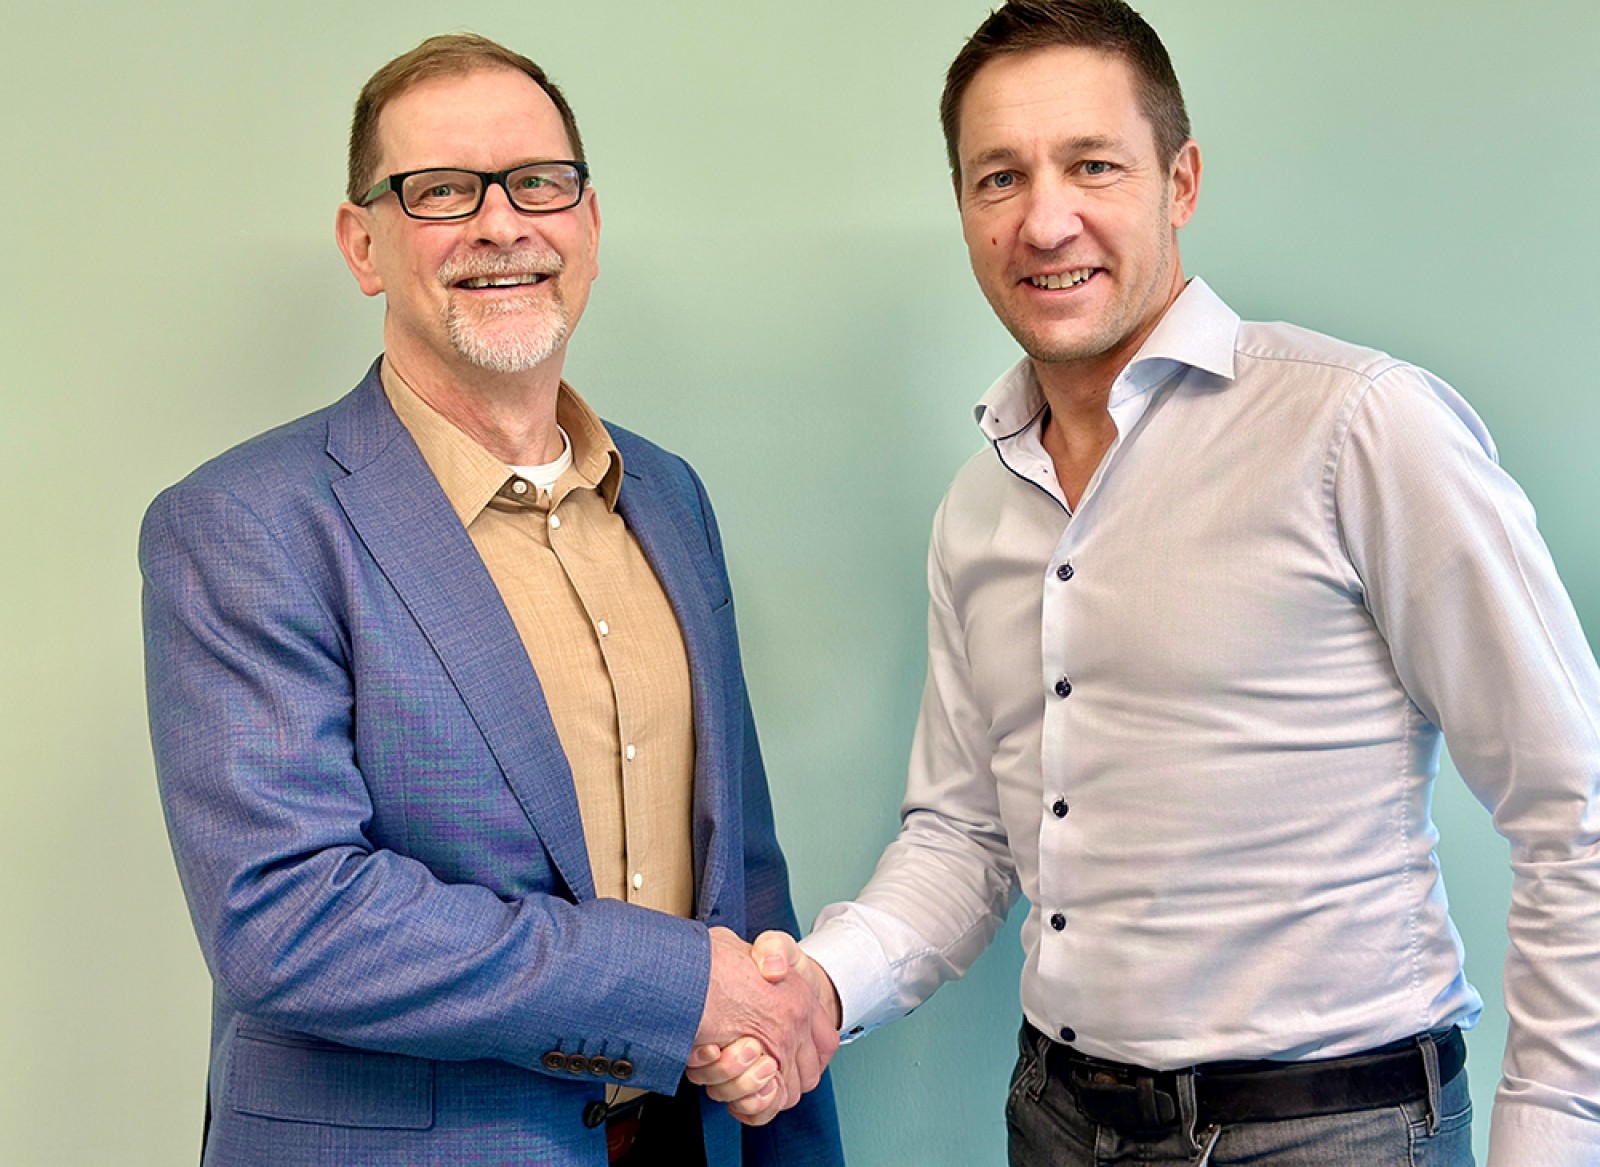 PRESS RELEASE: Conscia acquires ITGL, bolstering digital transformation offerings and spearheading entry into the UK and Ireland